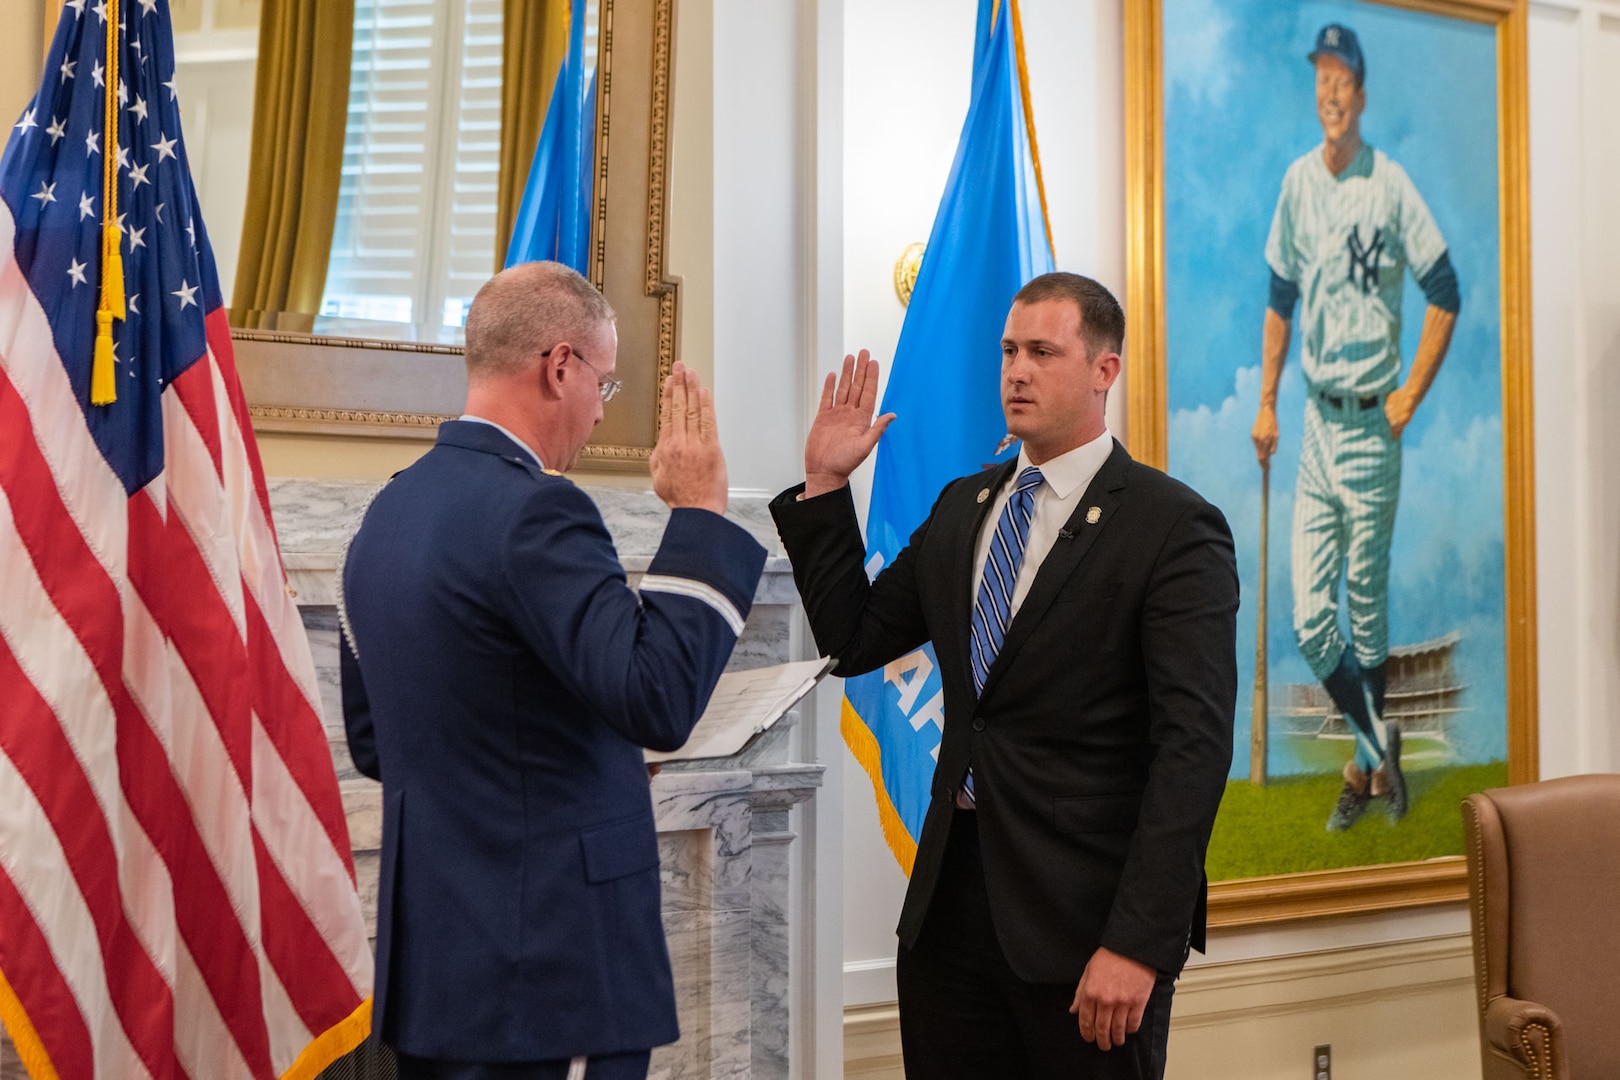 U.S. Air Force Maj. Rex Alan Star, left, Arkansas Air National Guard, issues the oath of enlistment to Tom Woods, an Oklahoma state senator, at the Oklahoma State Capitol on June 26, 2023, Oklahoma City. Woods said he enlisted into the Oklahoma ANG for the opportunity to serve more Oklahomans than who he currently serves in his congressional district. (U.S. Air National Guard photo by Airman Erika Chapa)